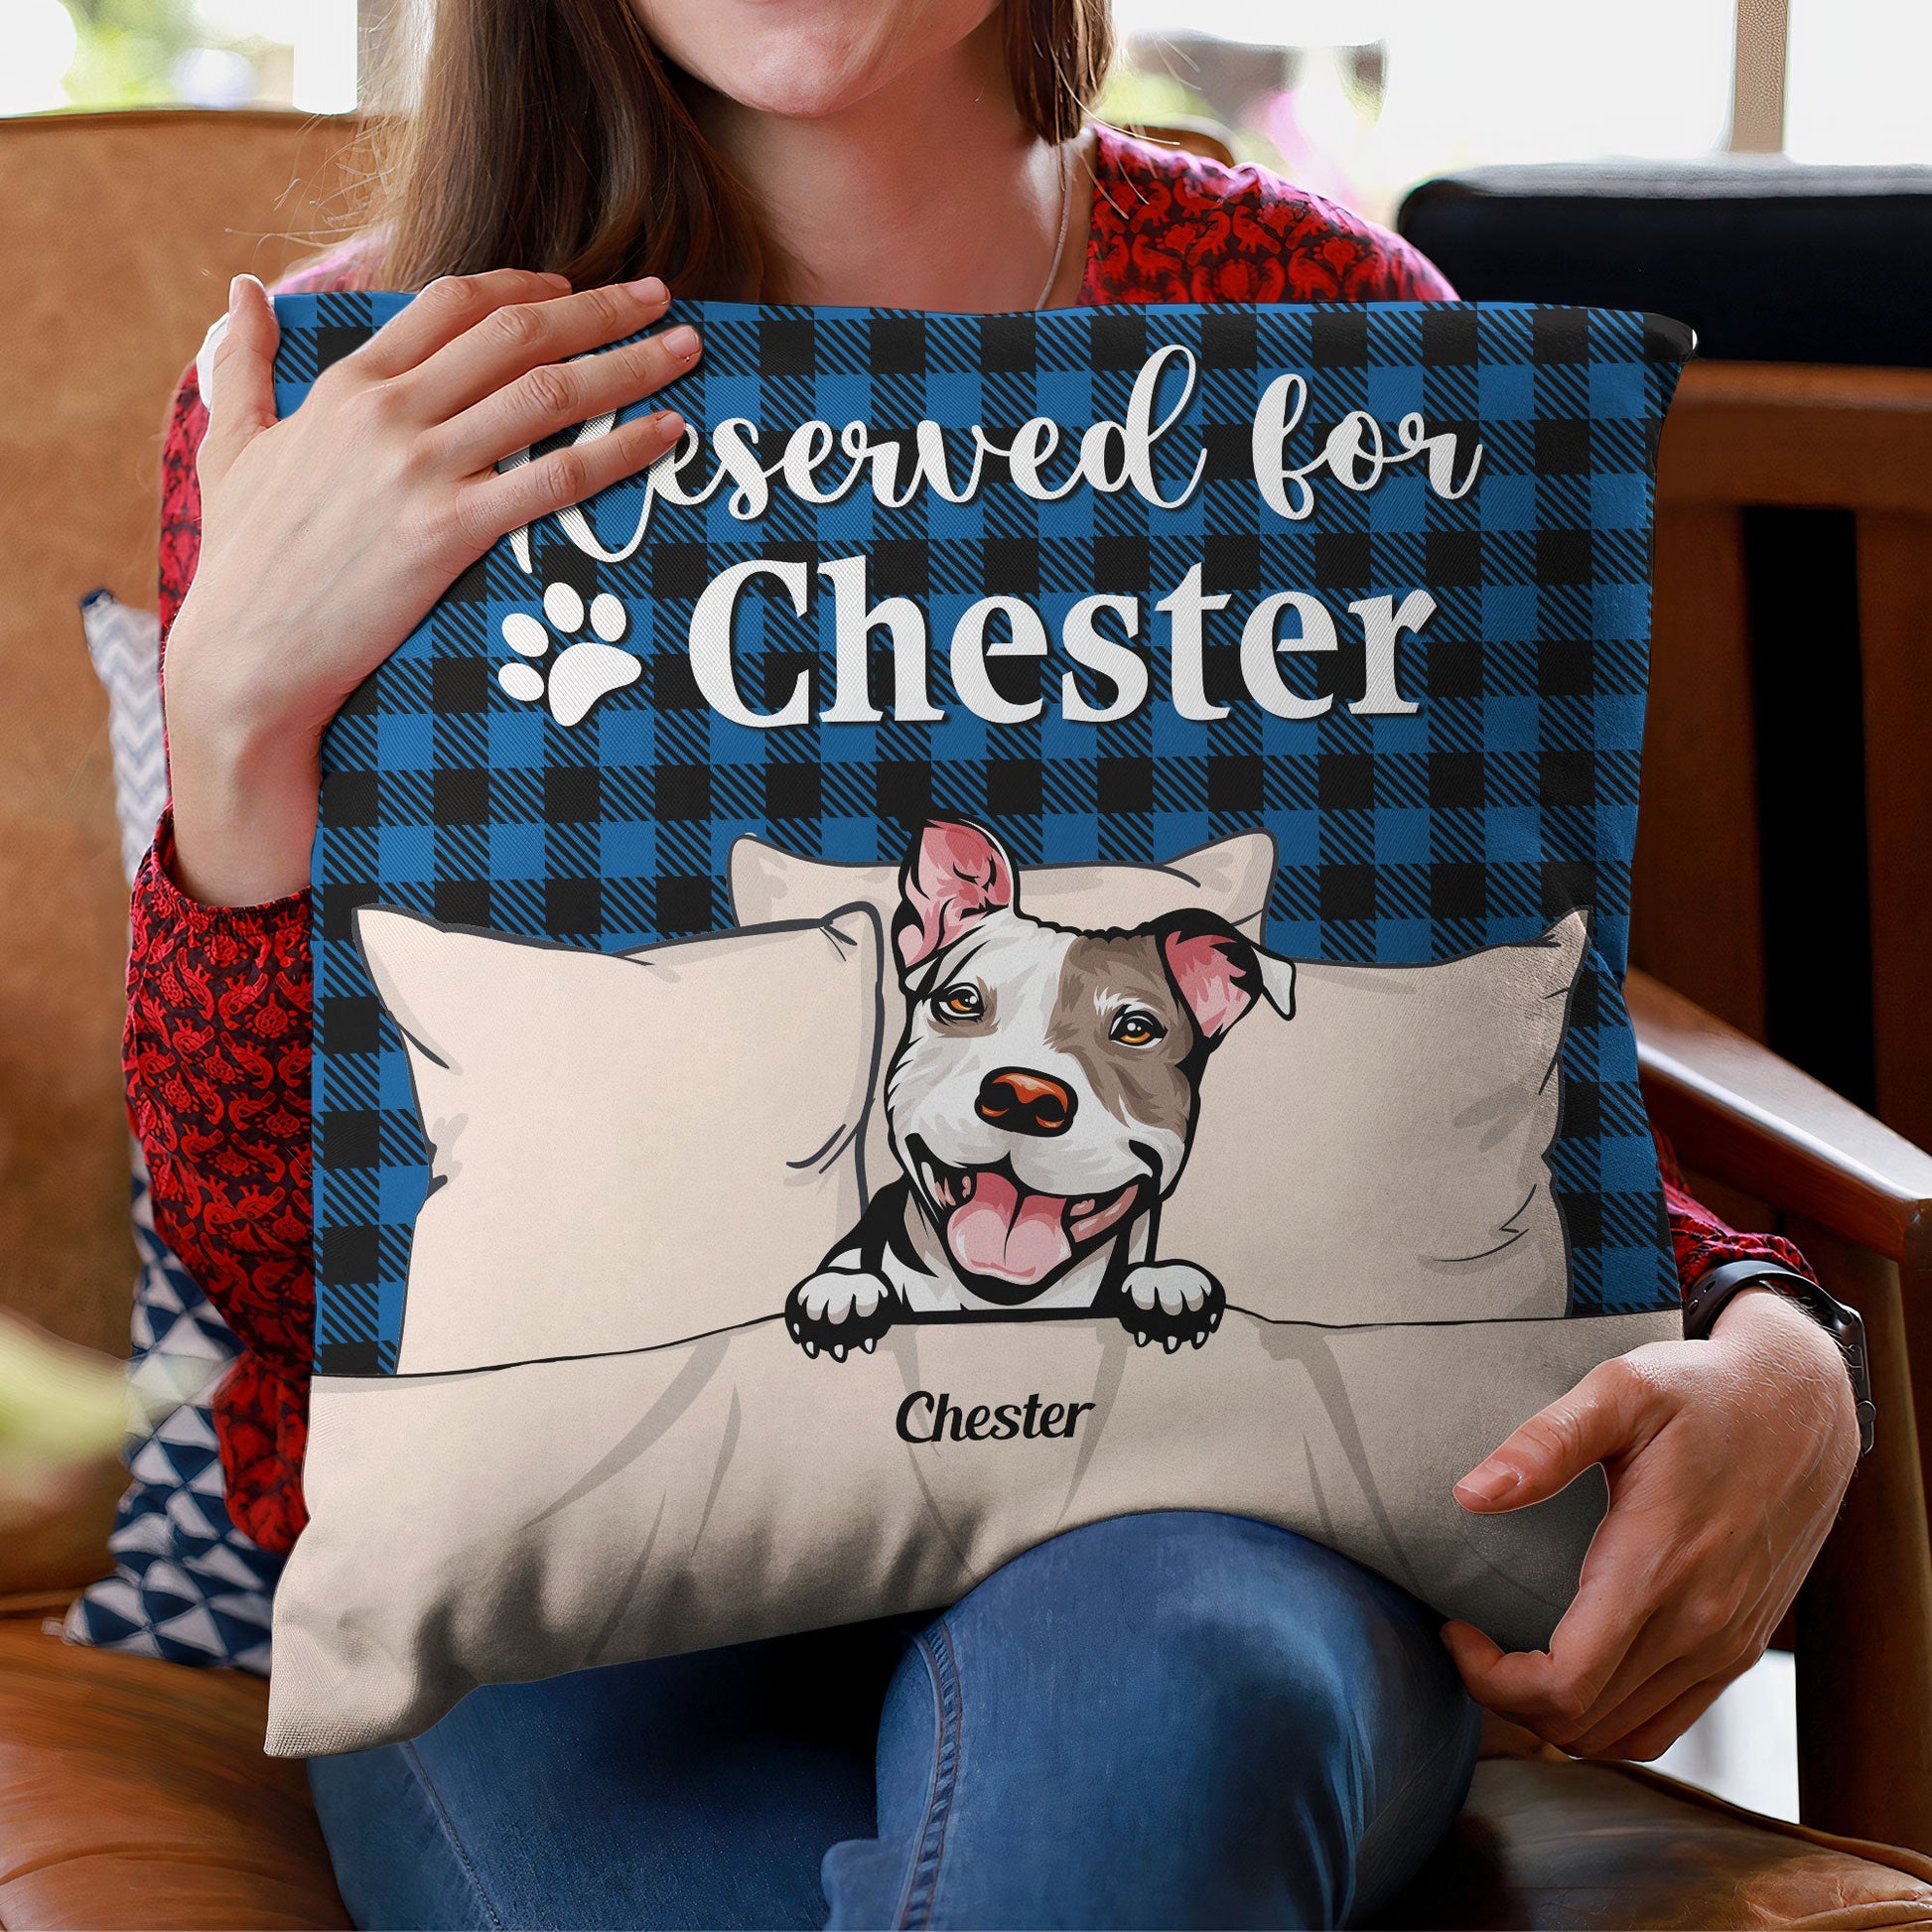 Pawfect House Personalized Pet Memorial Throw Pillow (Insert Included),  Christmas, Birthday Gifts Dog Pillow Pet Memorial, Custom Pillows with